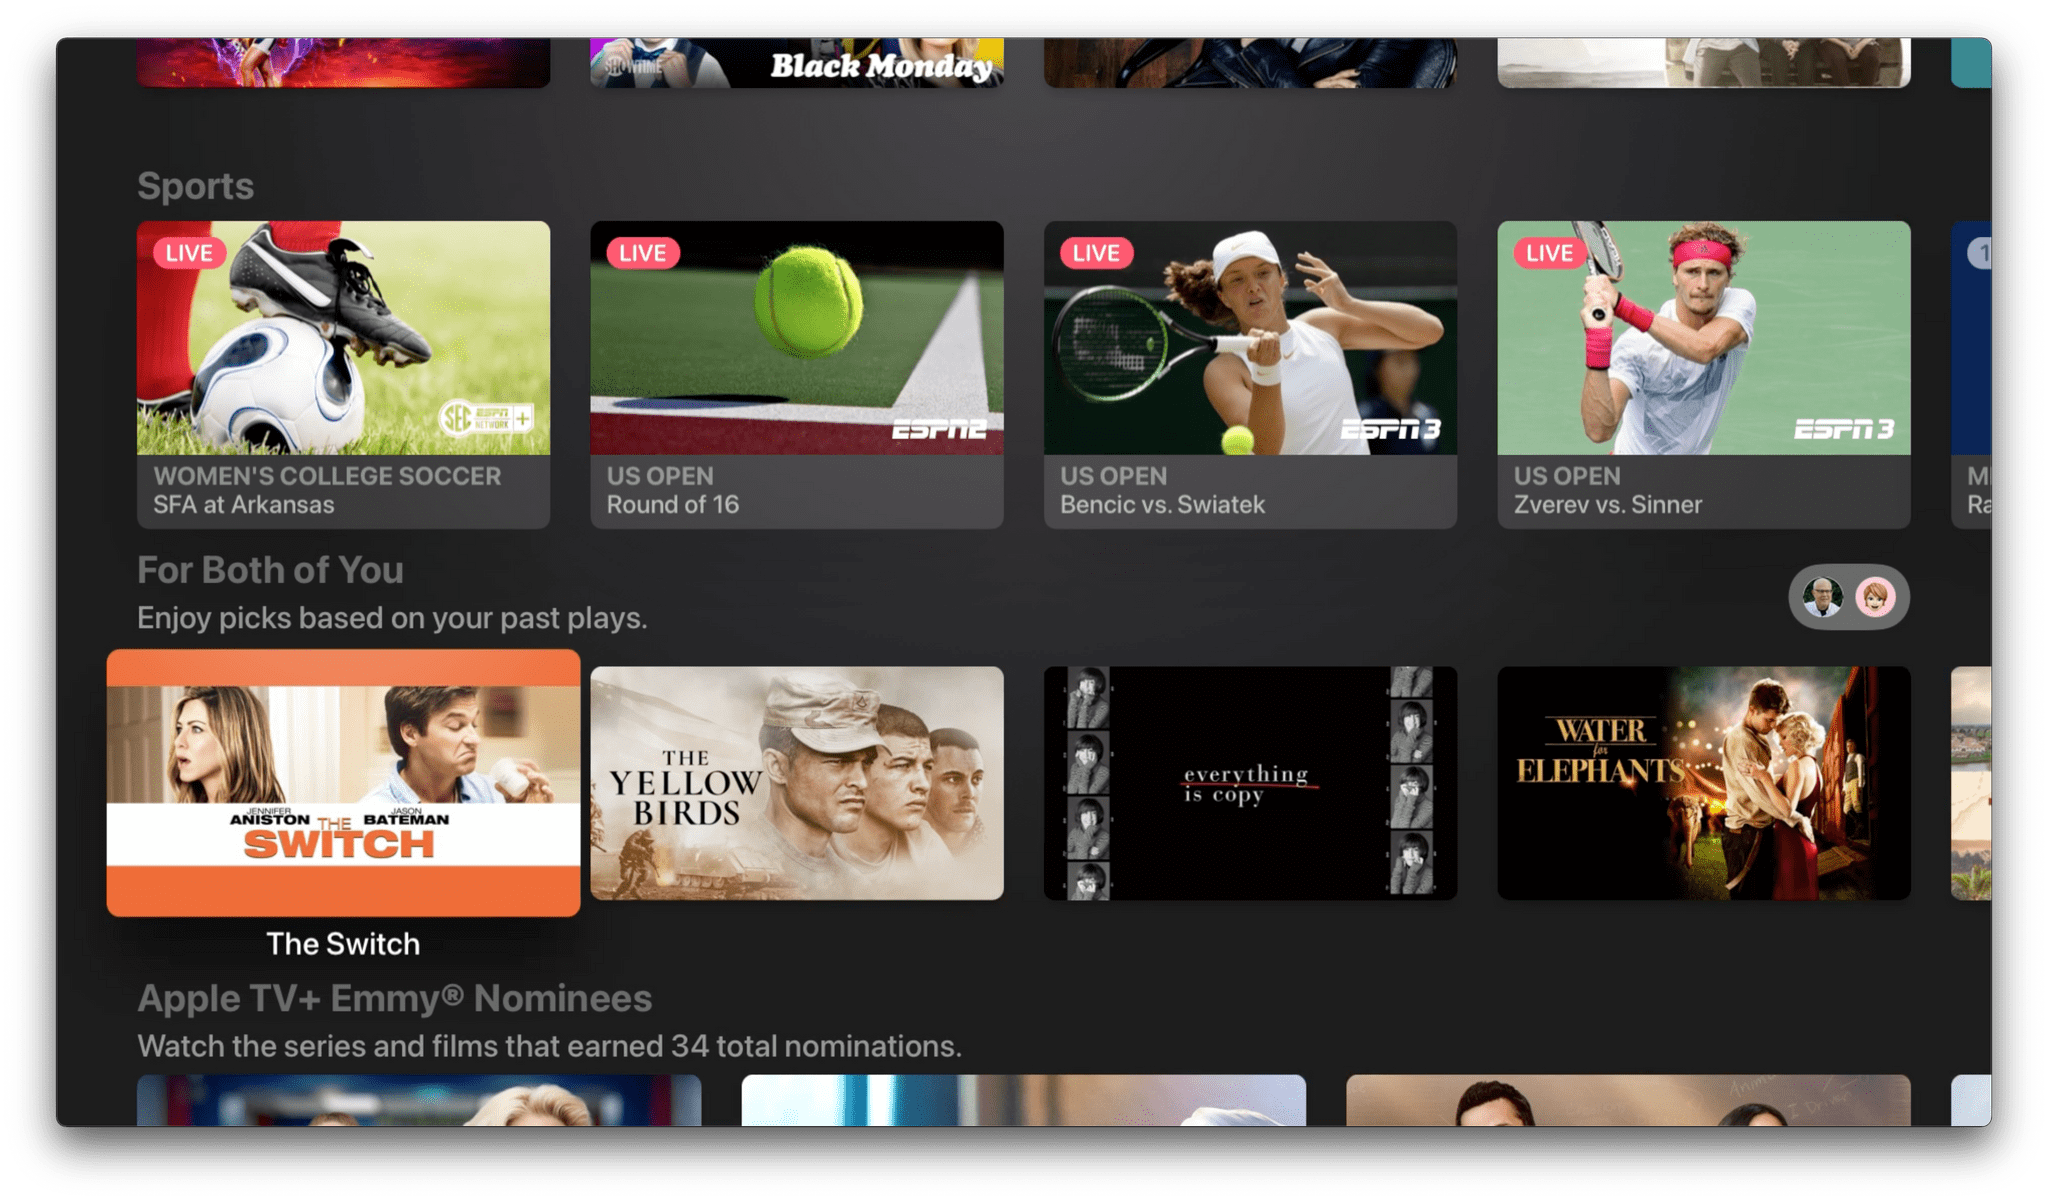 'For All of You' is a new recommendation feature based on multiple users' viewing habits.